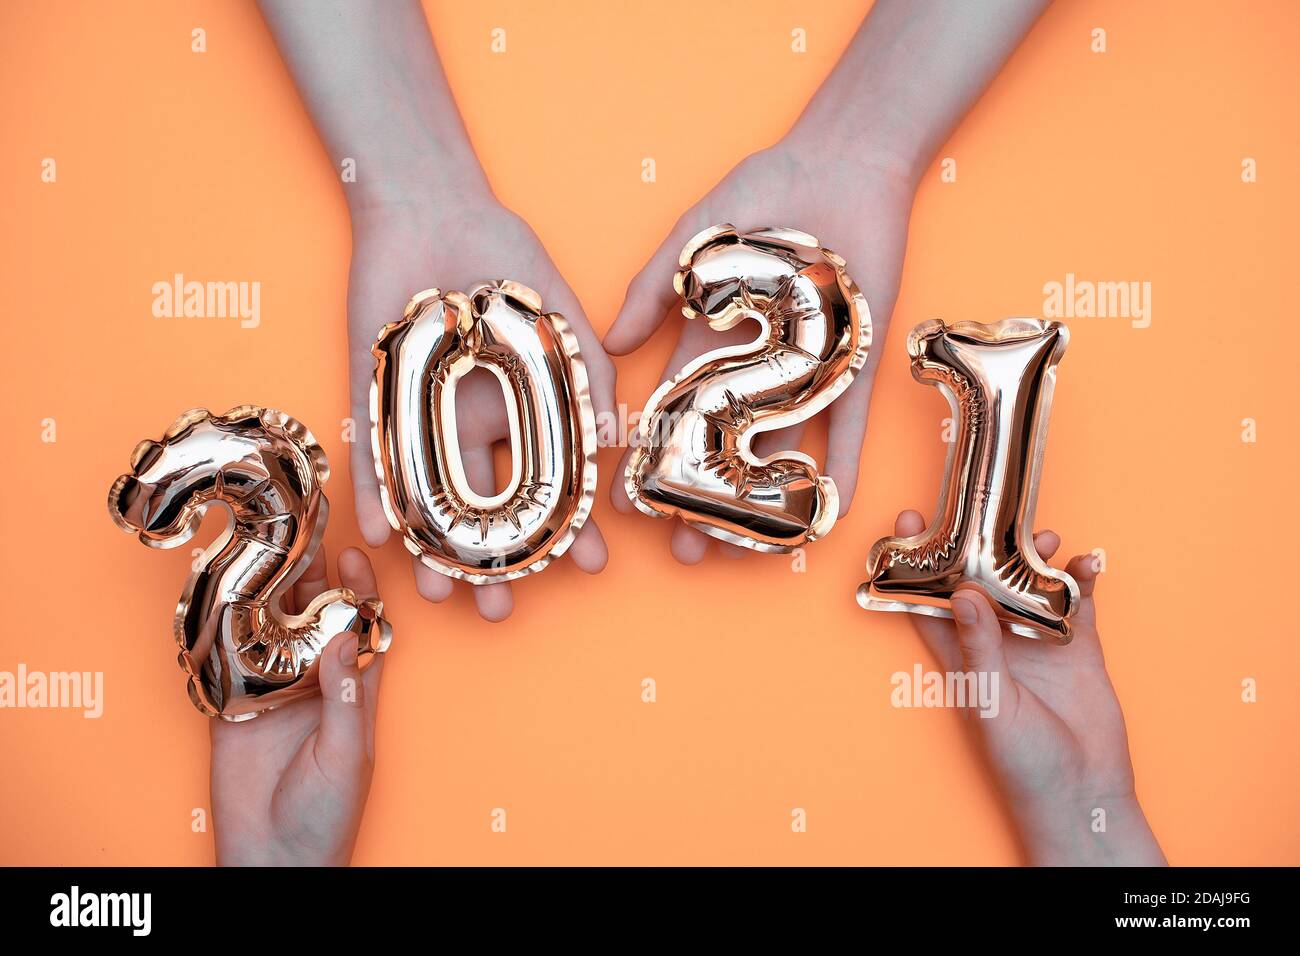 Golden new year numbers-balls 2021 held by people at arm's length up on a yellow background.  Stock Photo